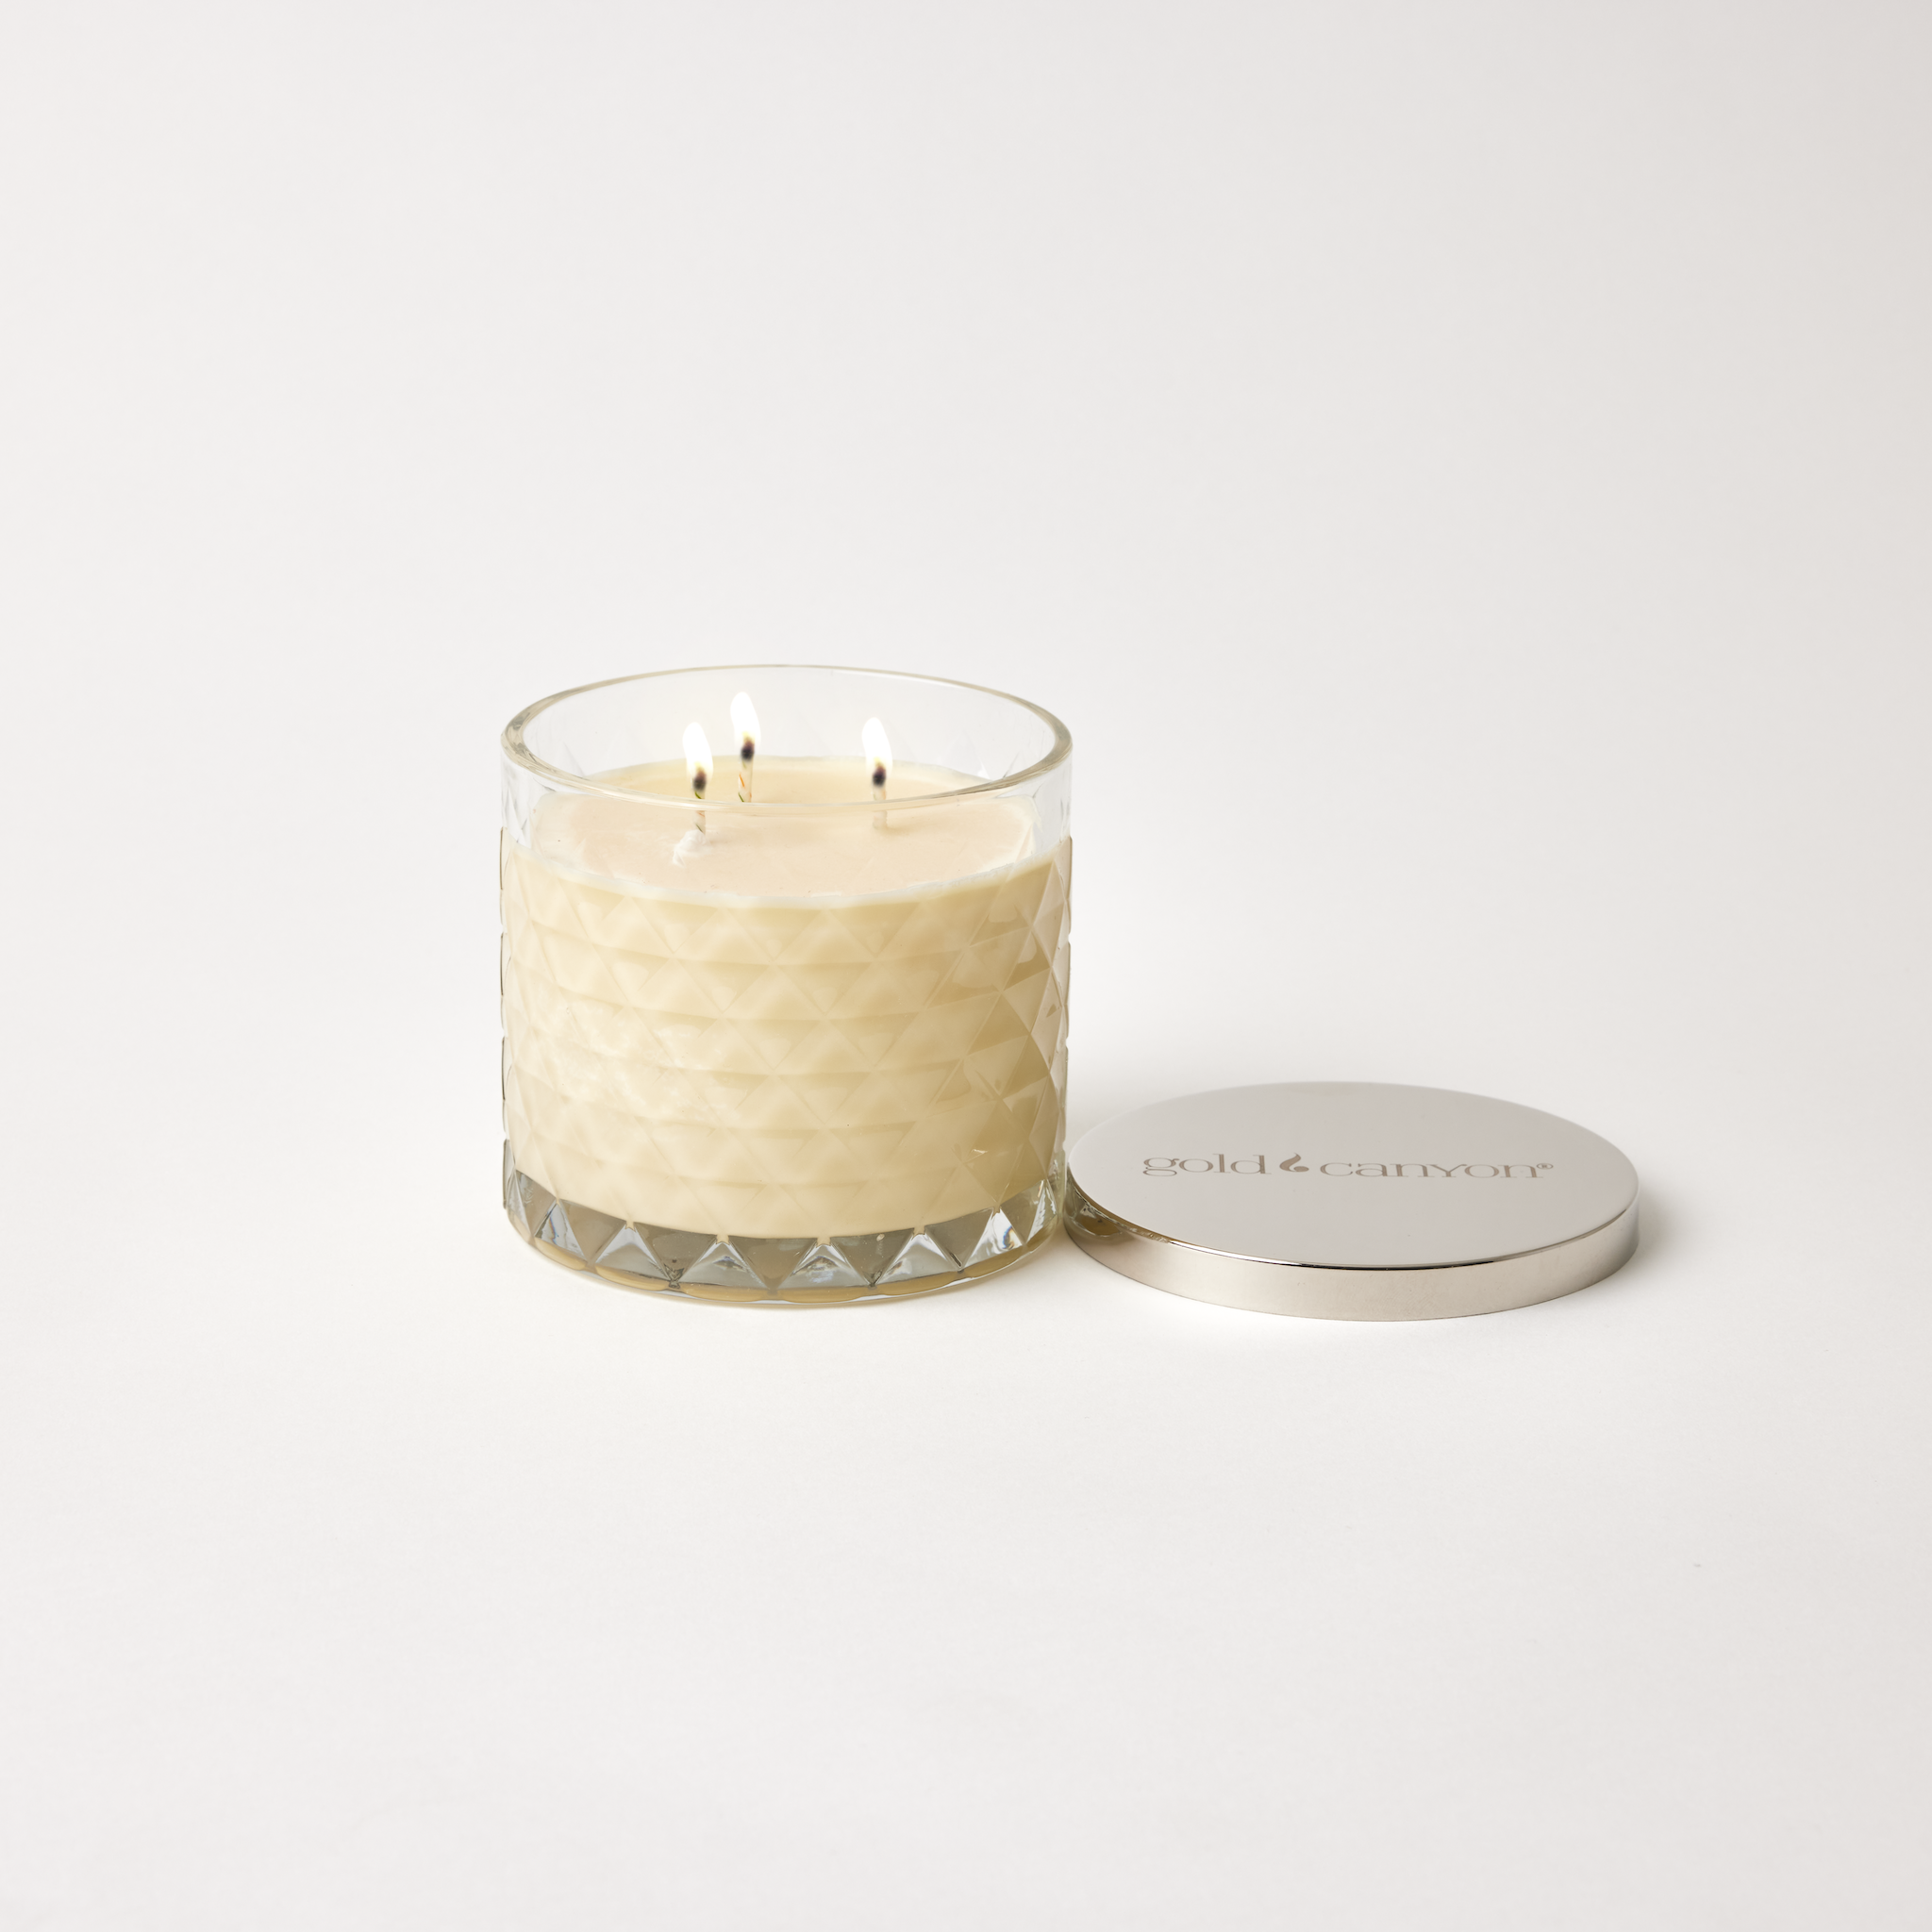  Gold Canyon Lavender Chamomile Scented Soy Candle